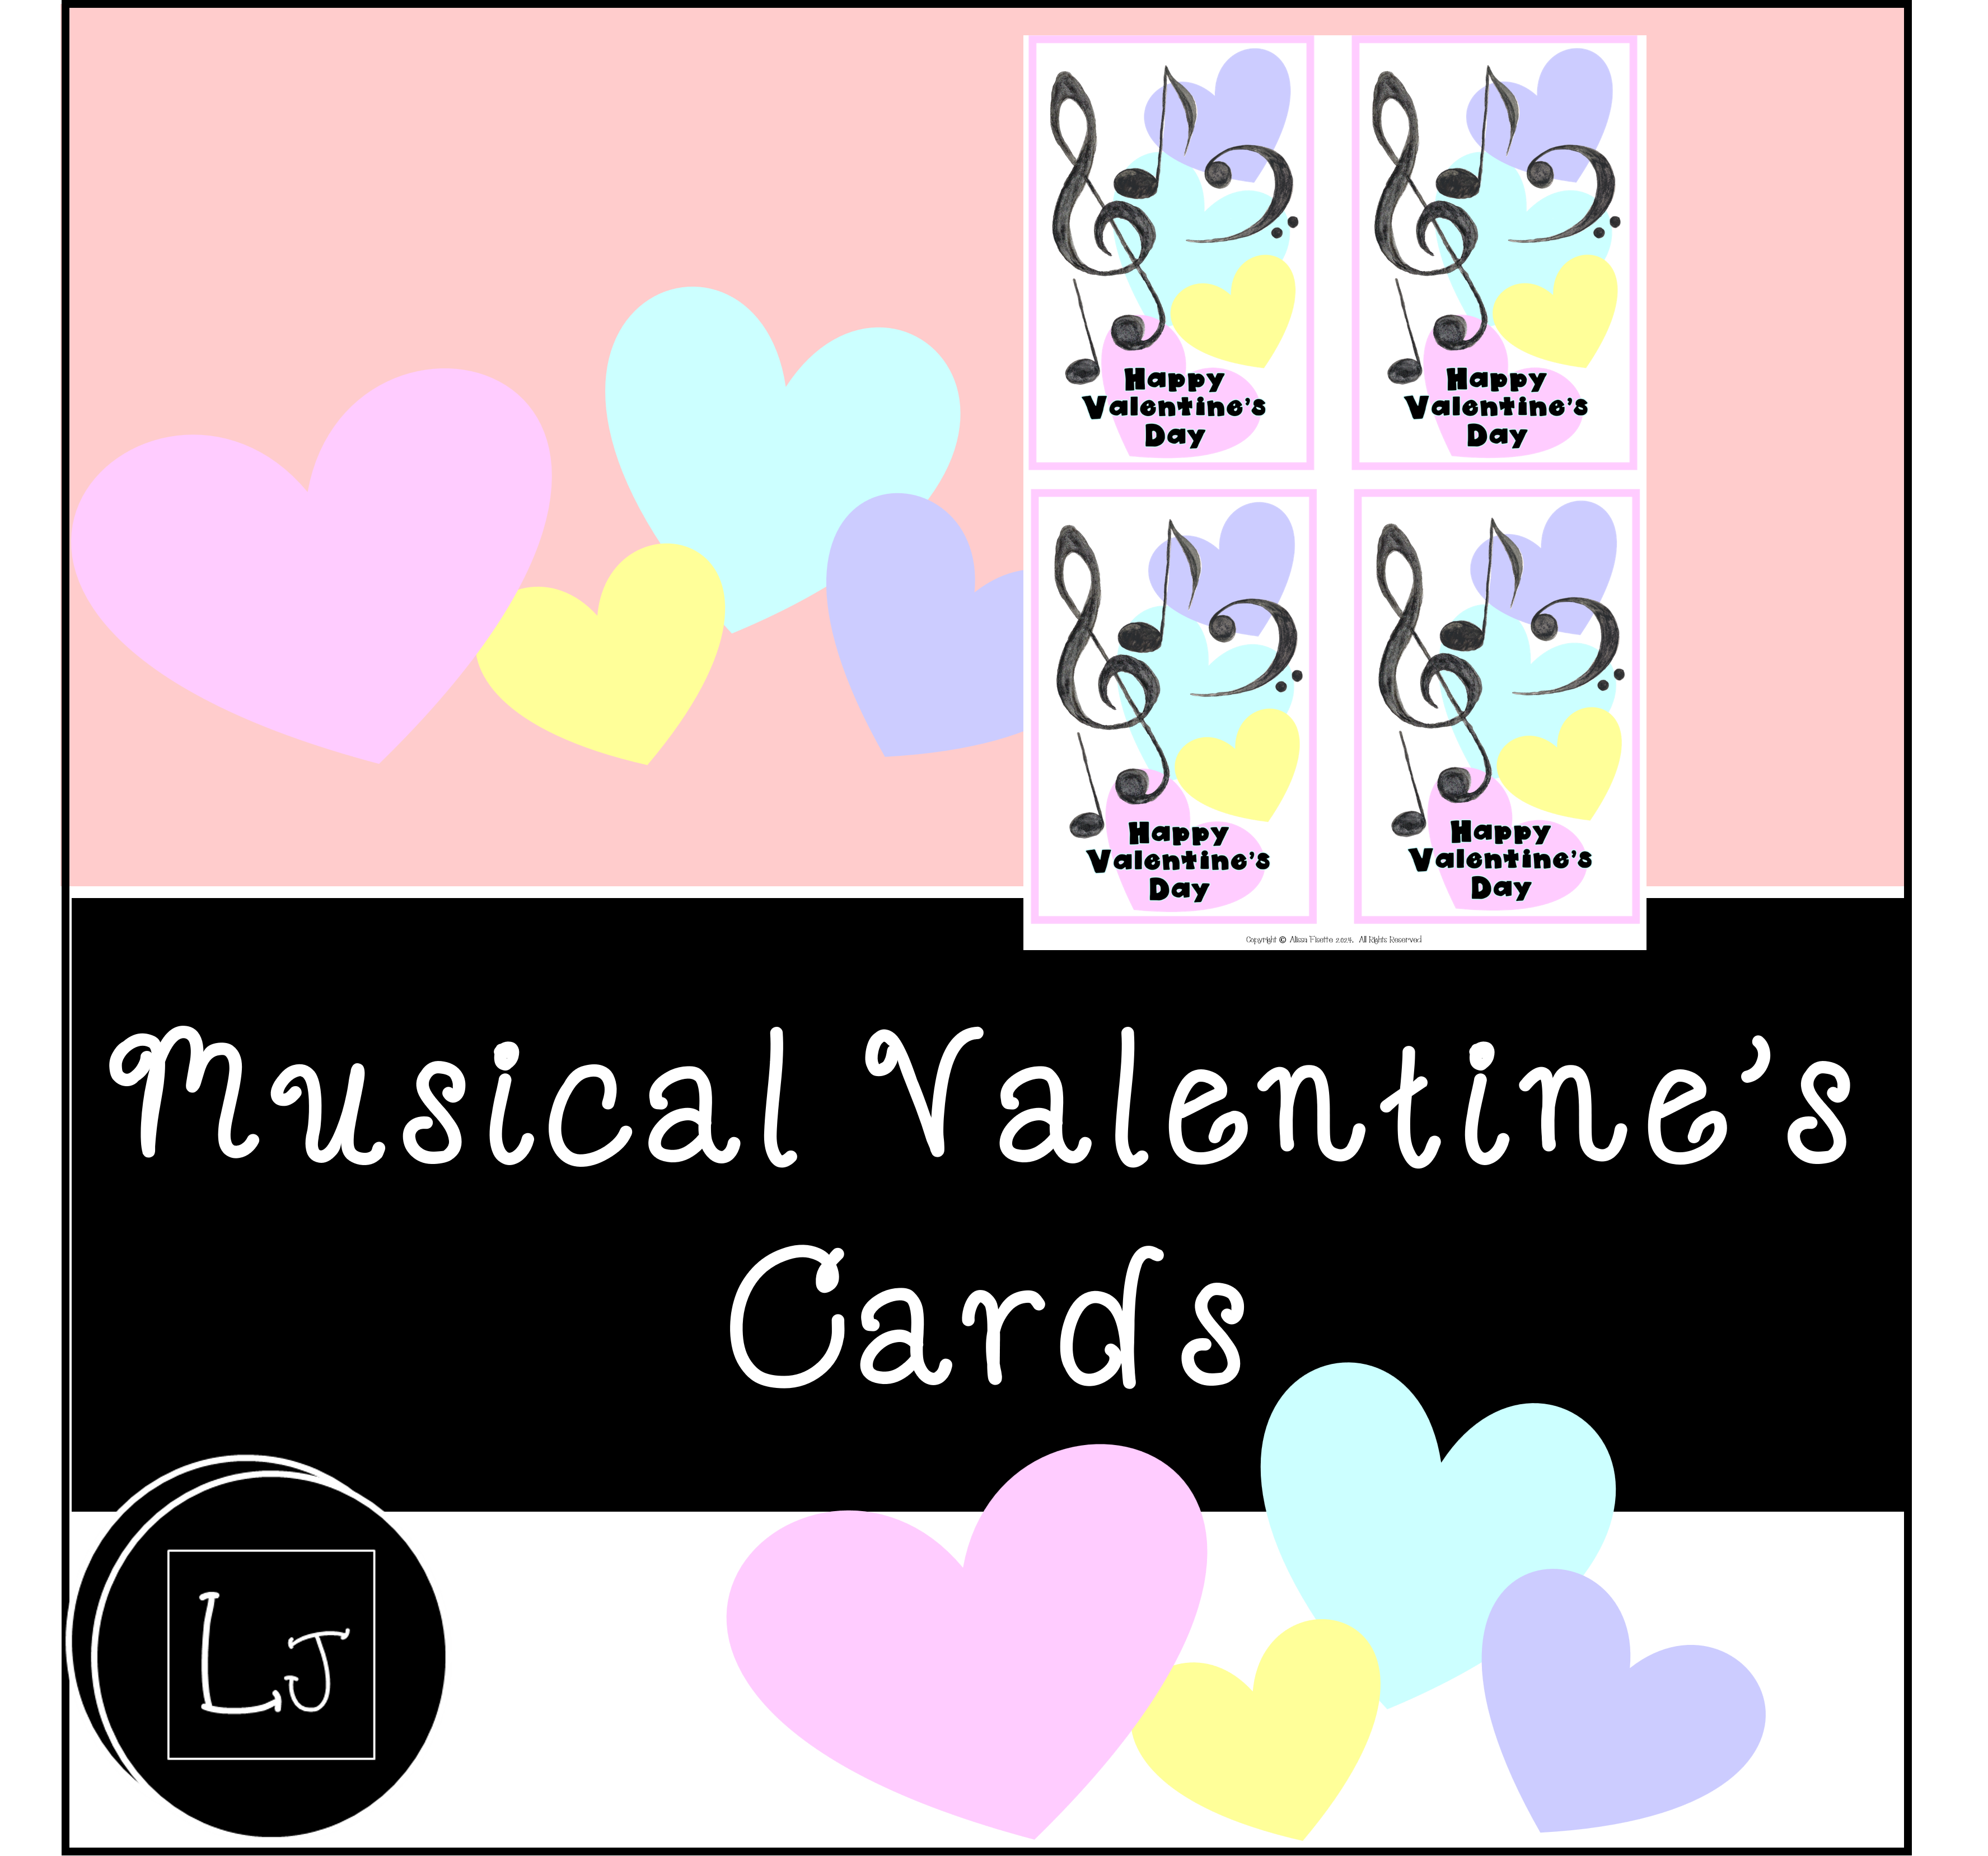 Musical Valentine's Cards Cover